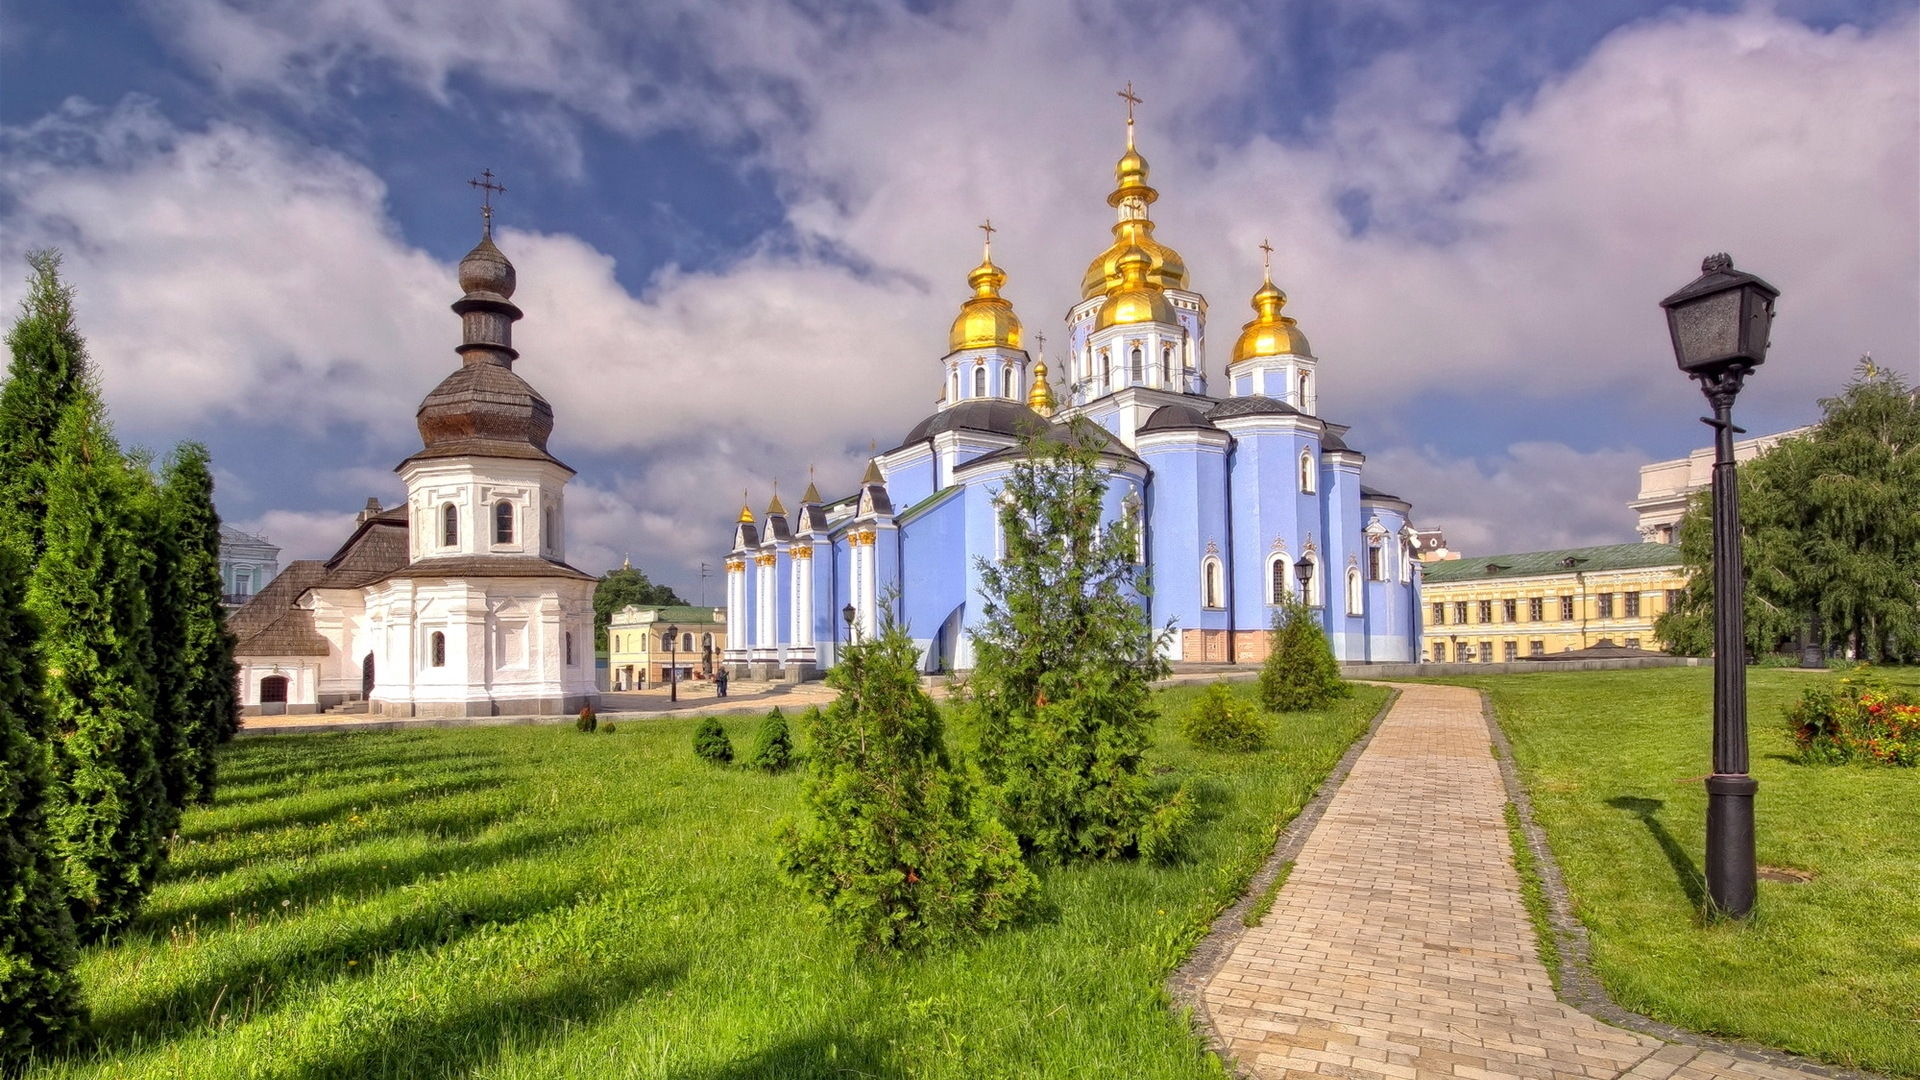 St Michael Cathedral Ukraine for 1920 x 1080 HDTV 1080p resolution